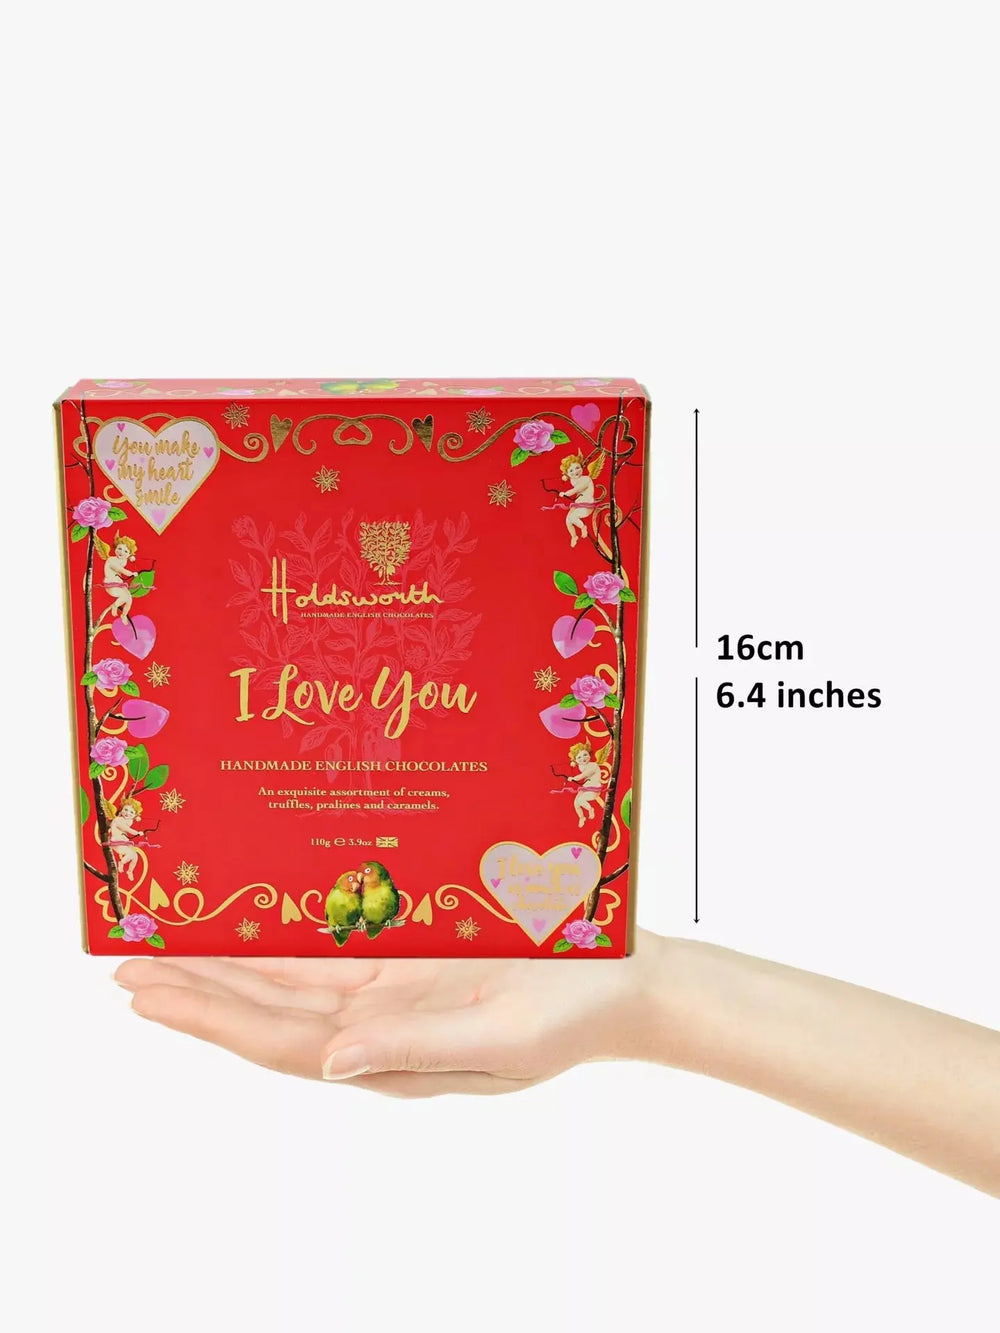 Holdsworth I Love You Gift Box 110g - The Beauty Store